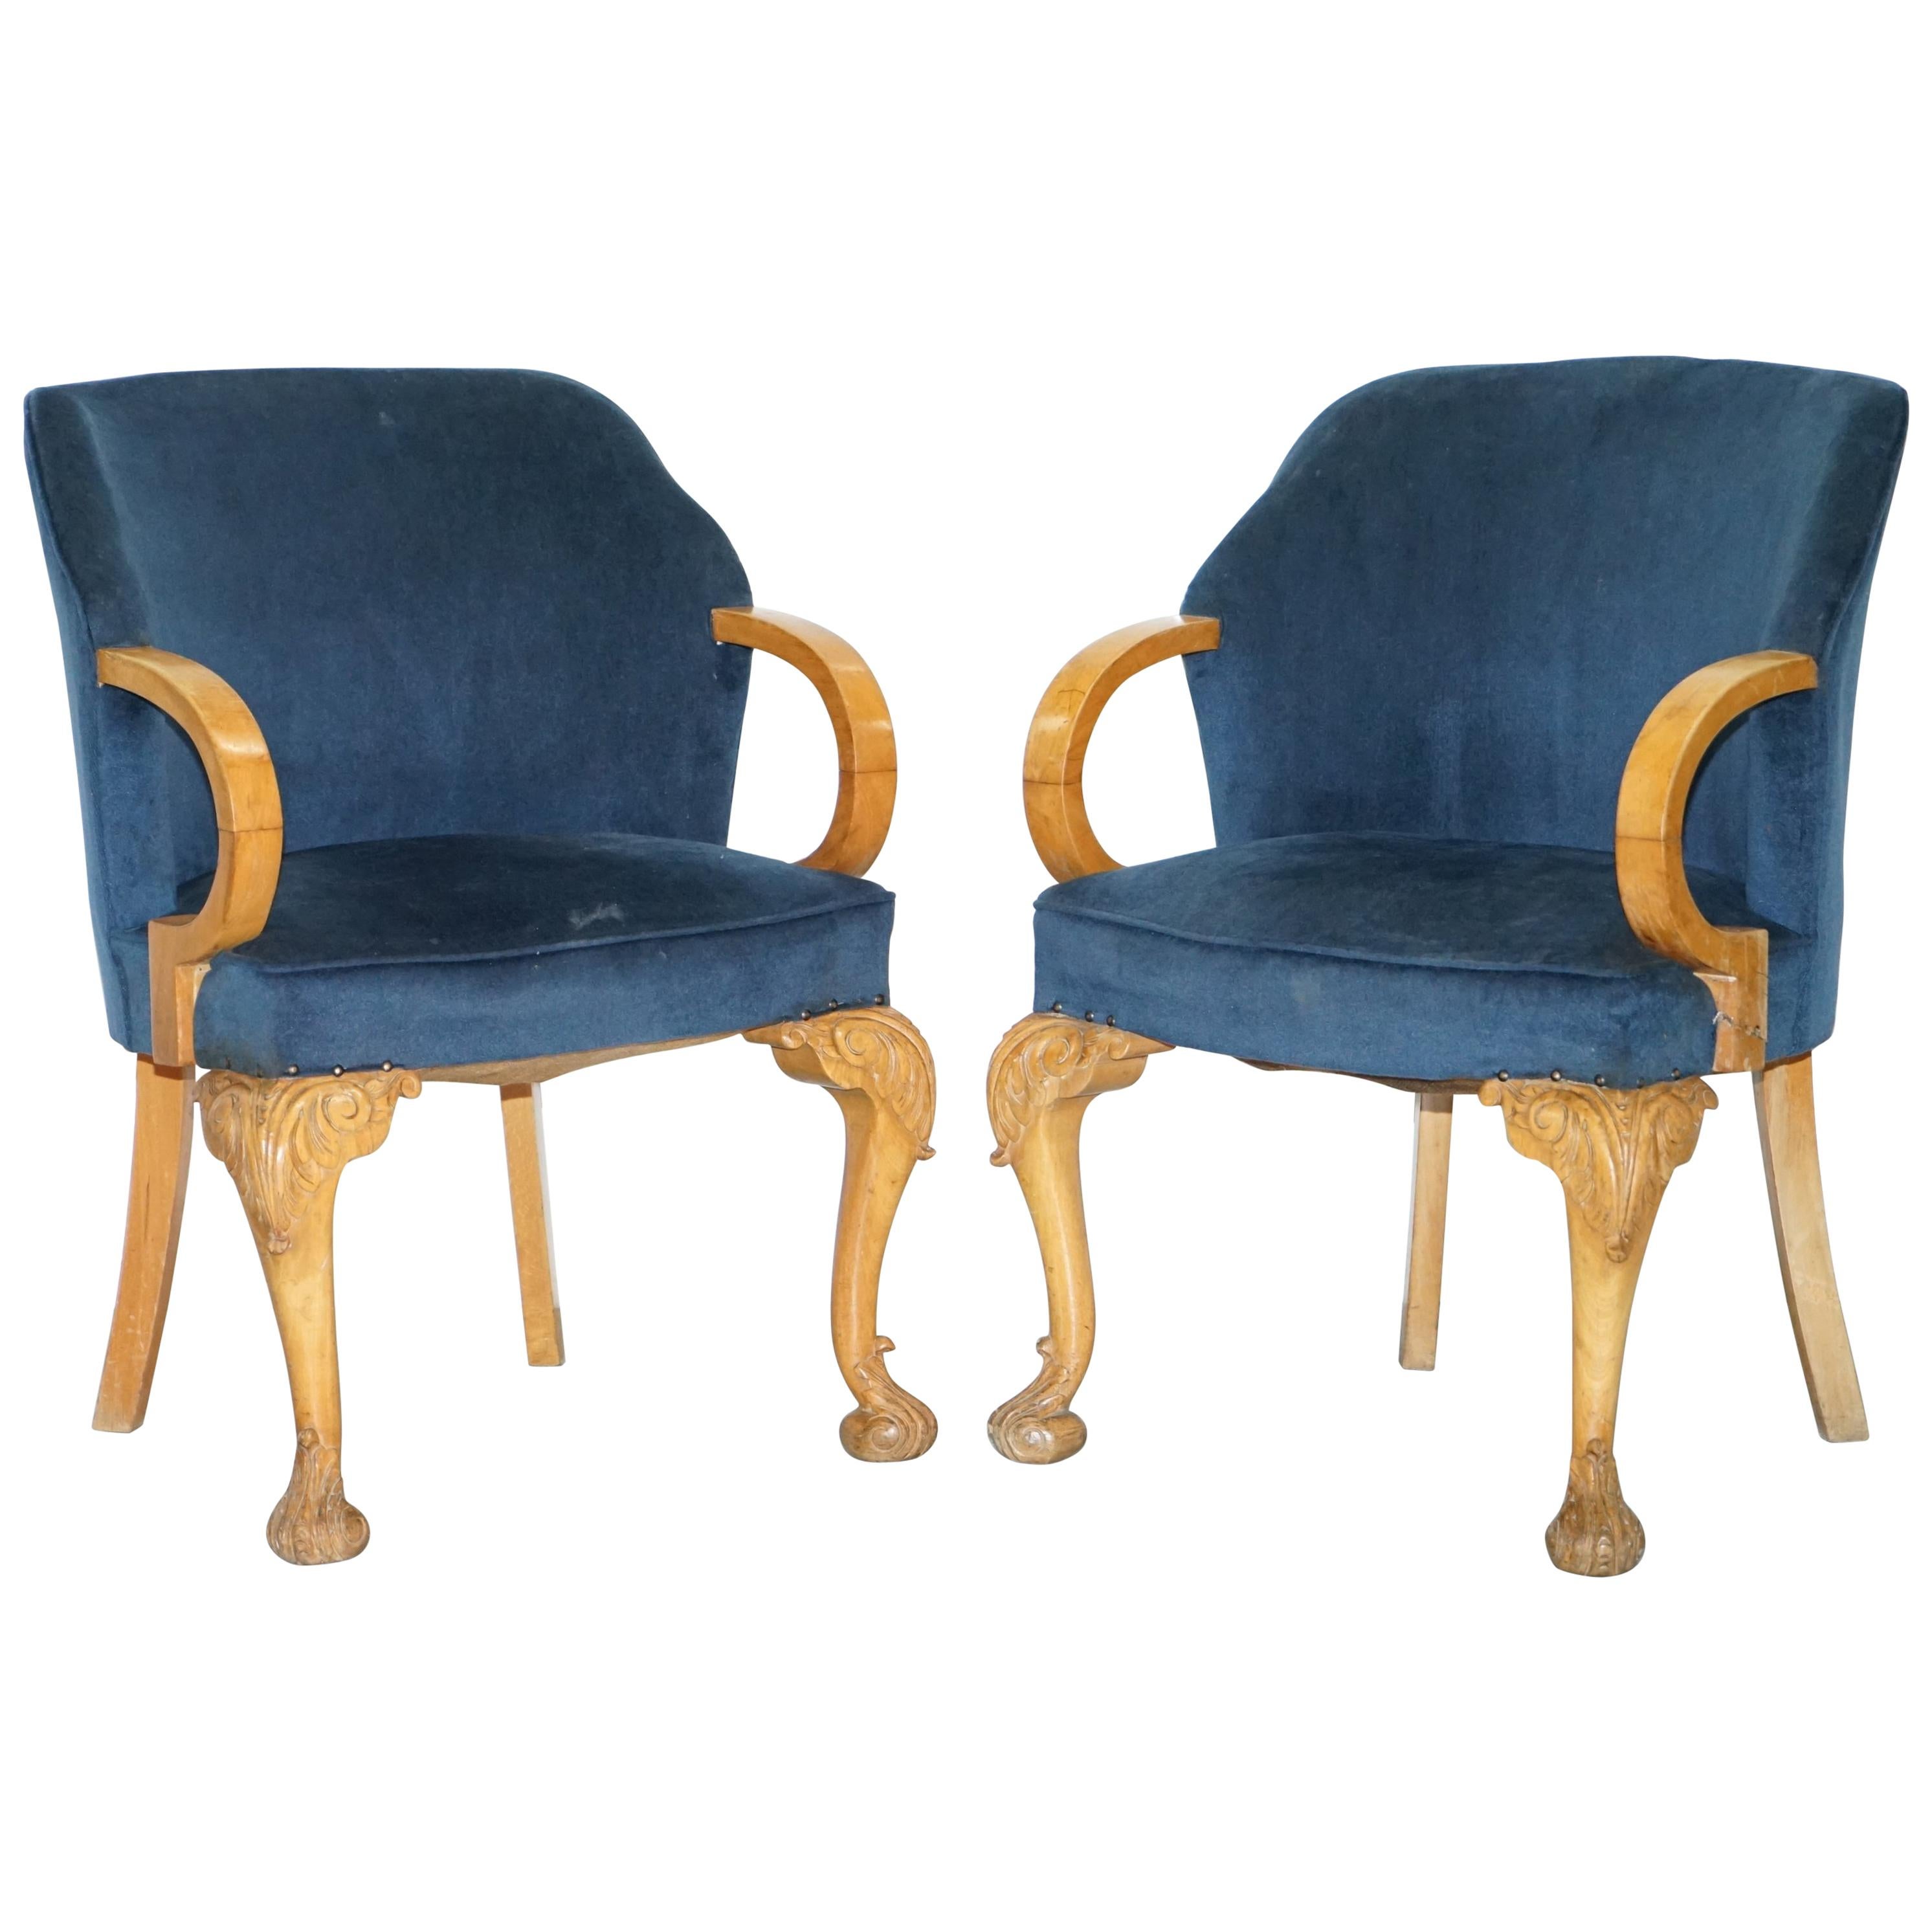 Pair of 1930s Art Deco Tub Armchairs Carved Georgian Legs Royal Blue Upholstery